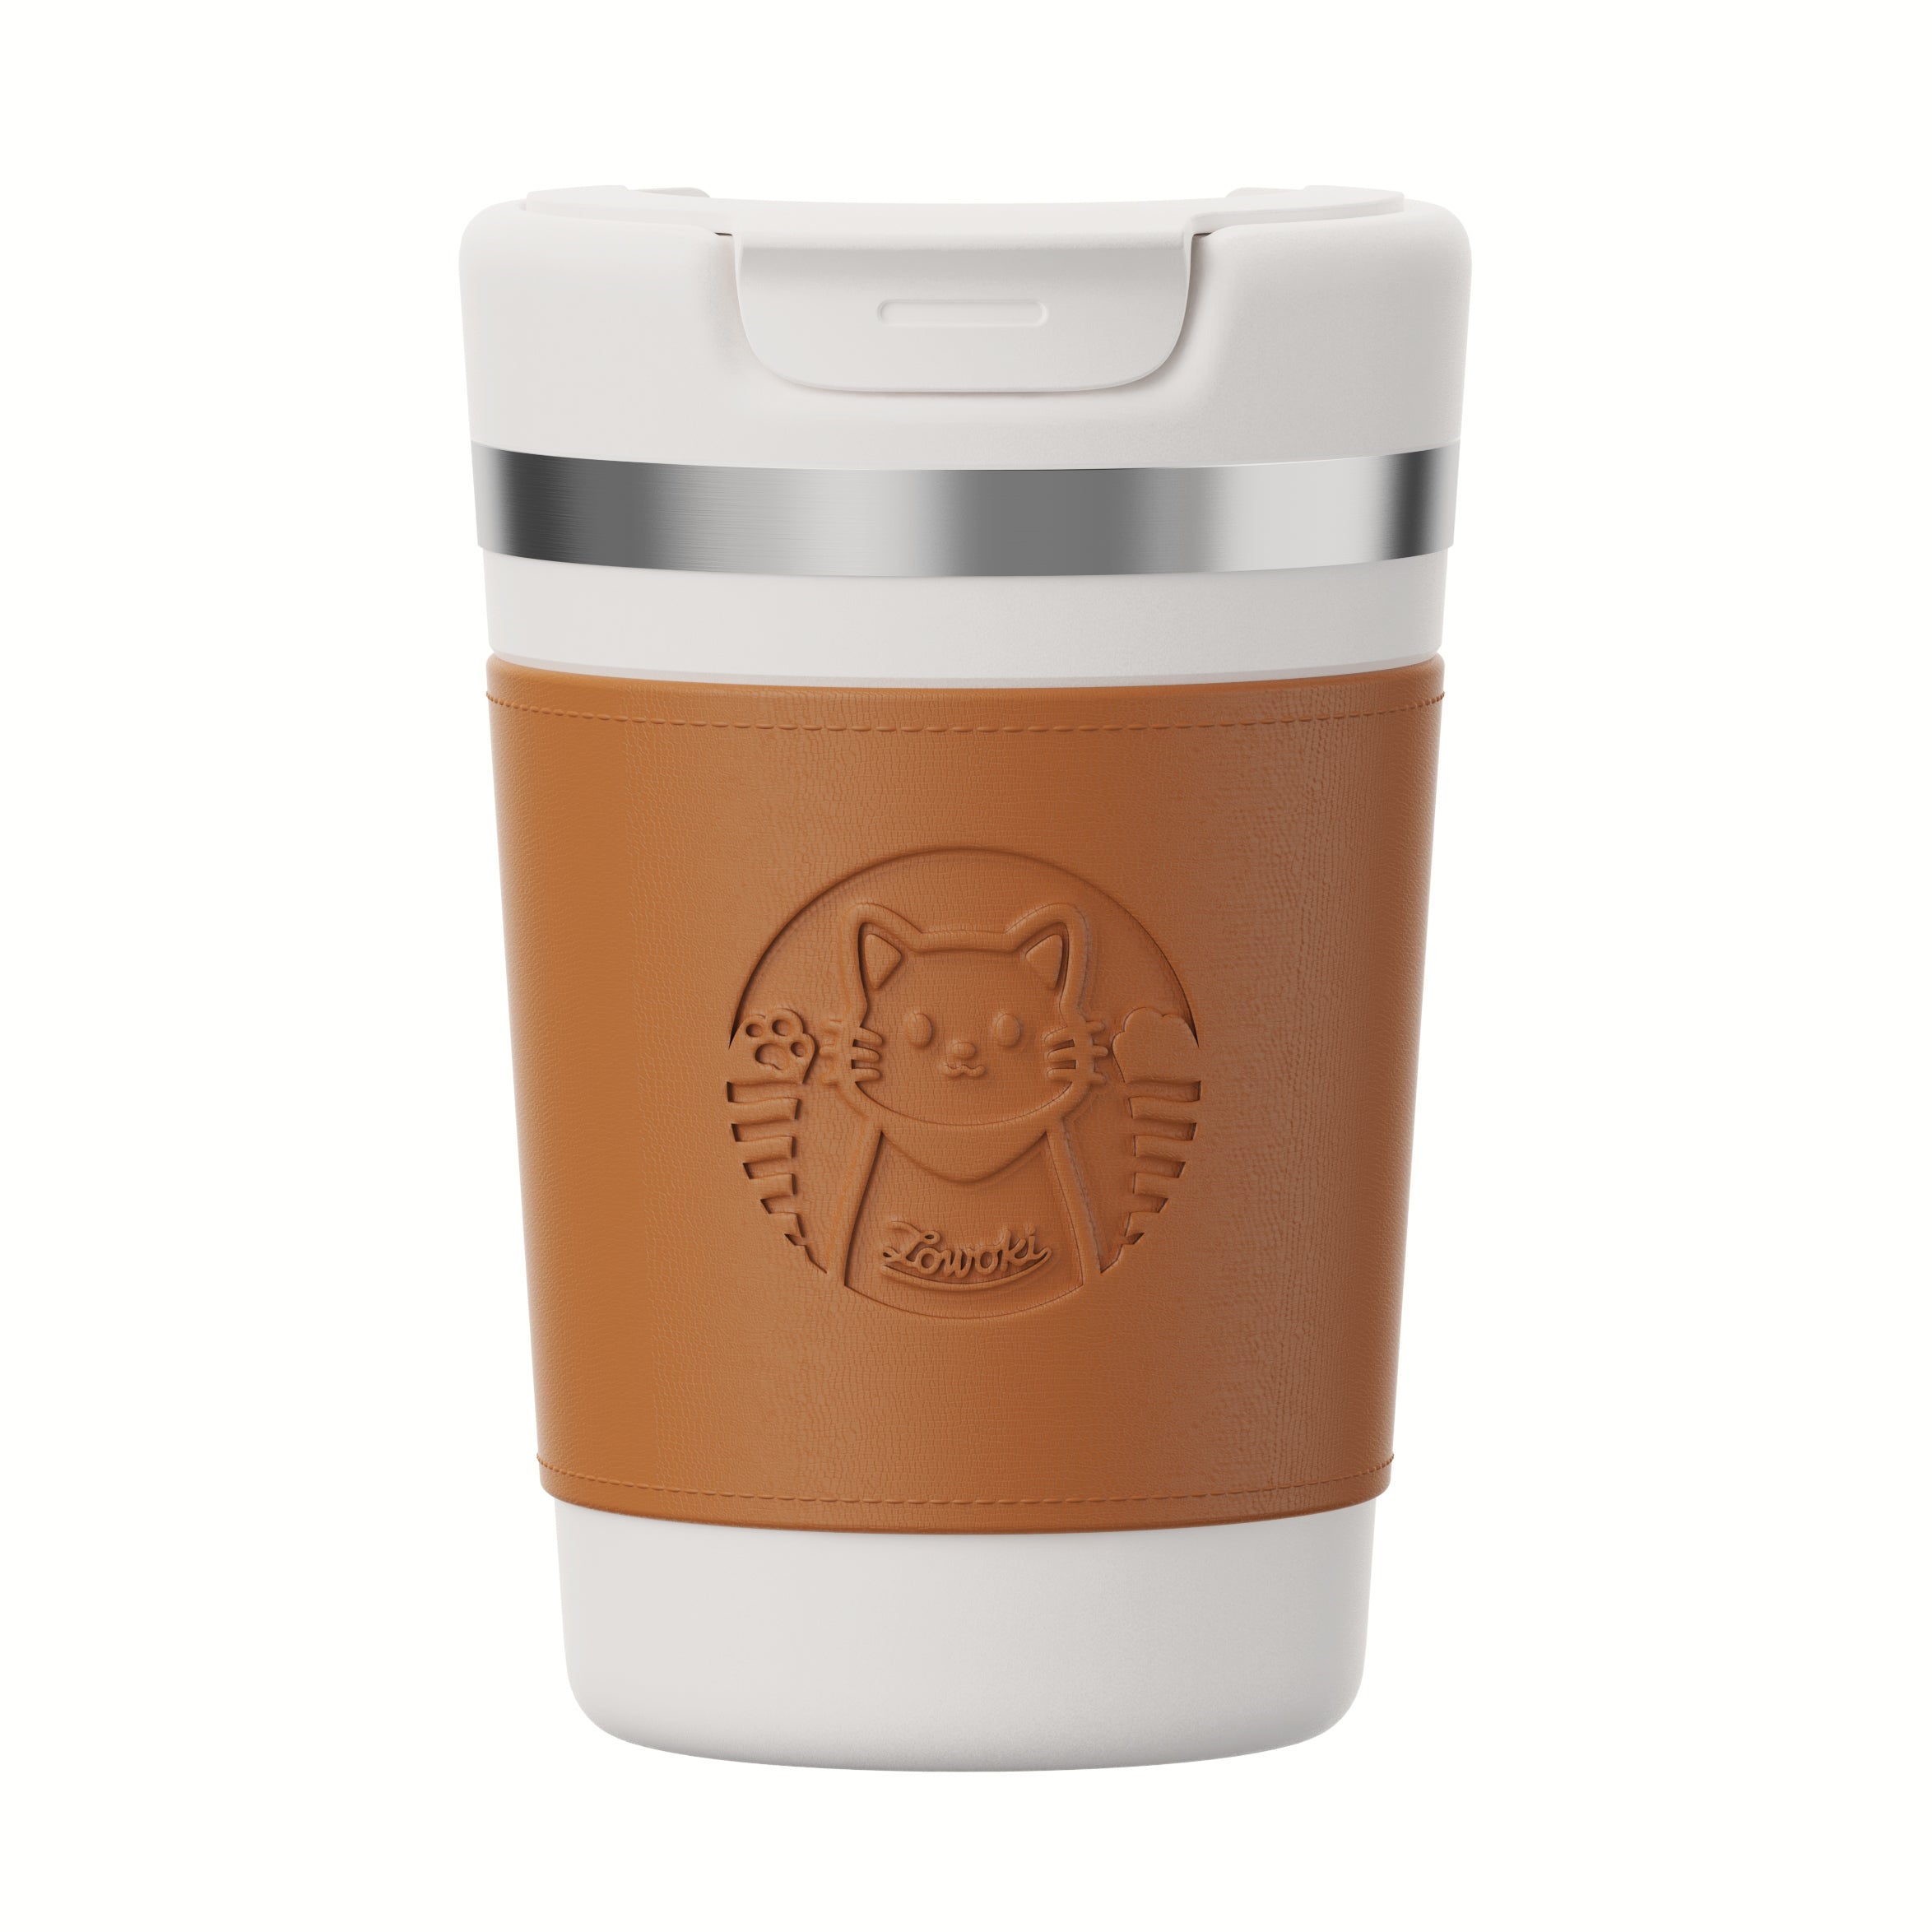 Creative Stainless Steel Insulated Coffee Cup